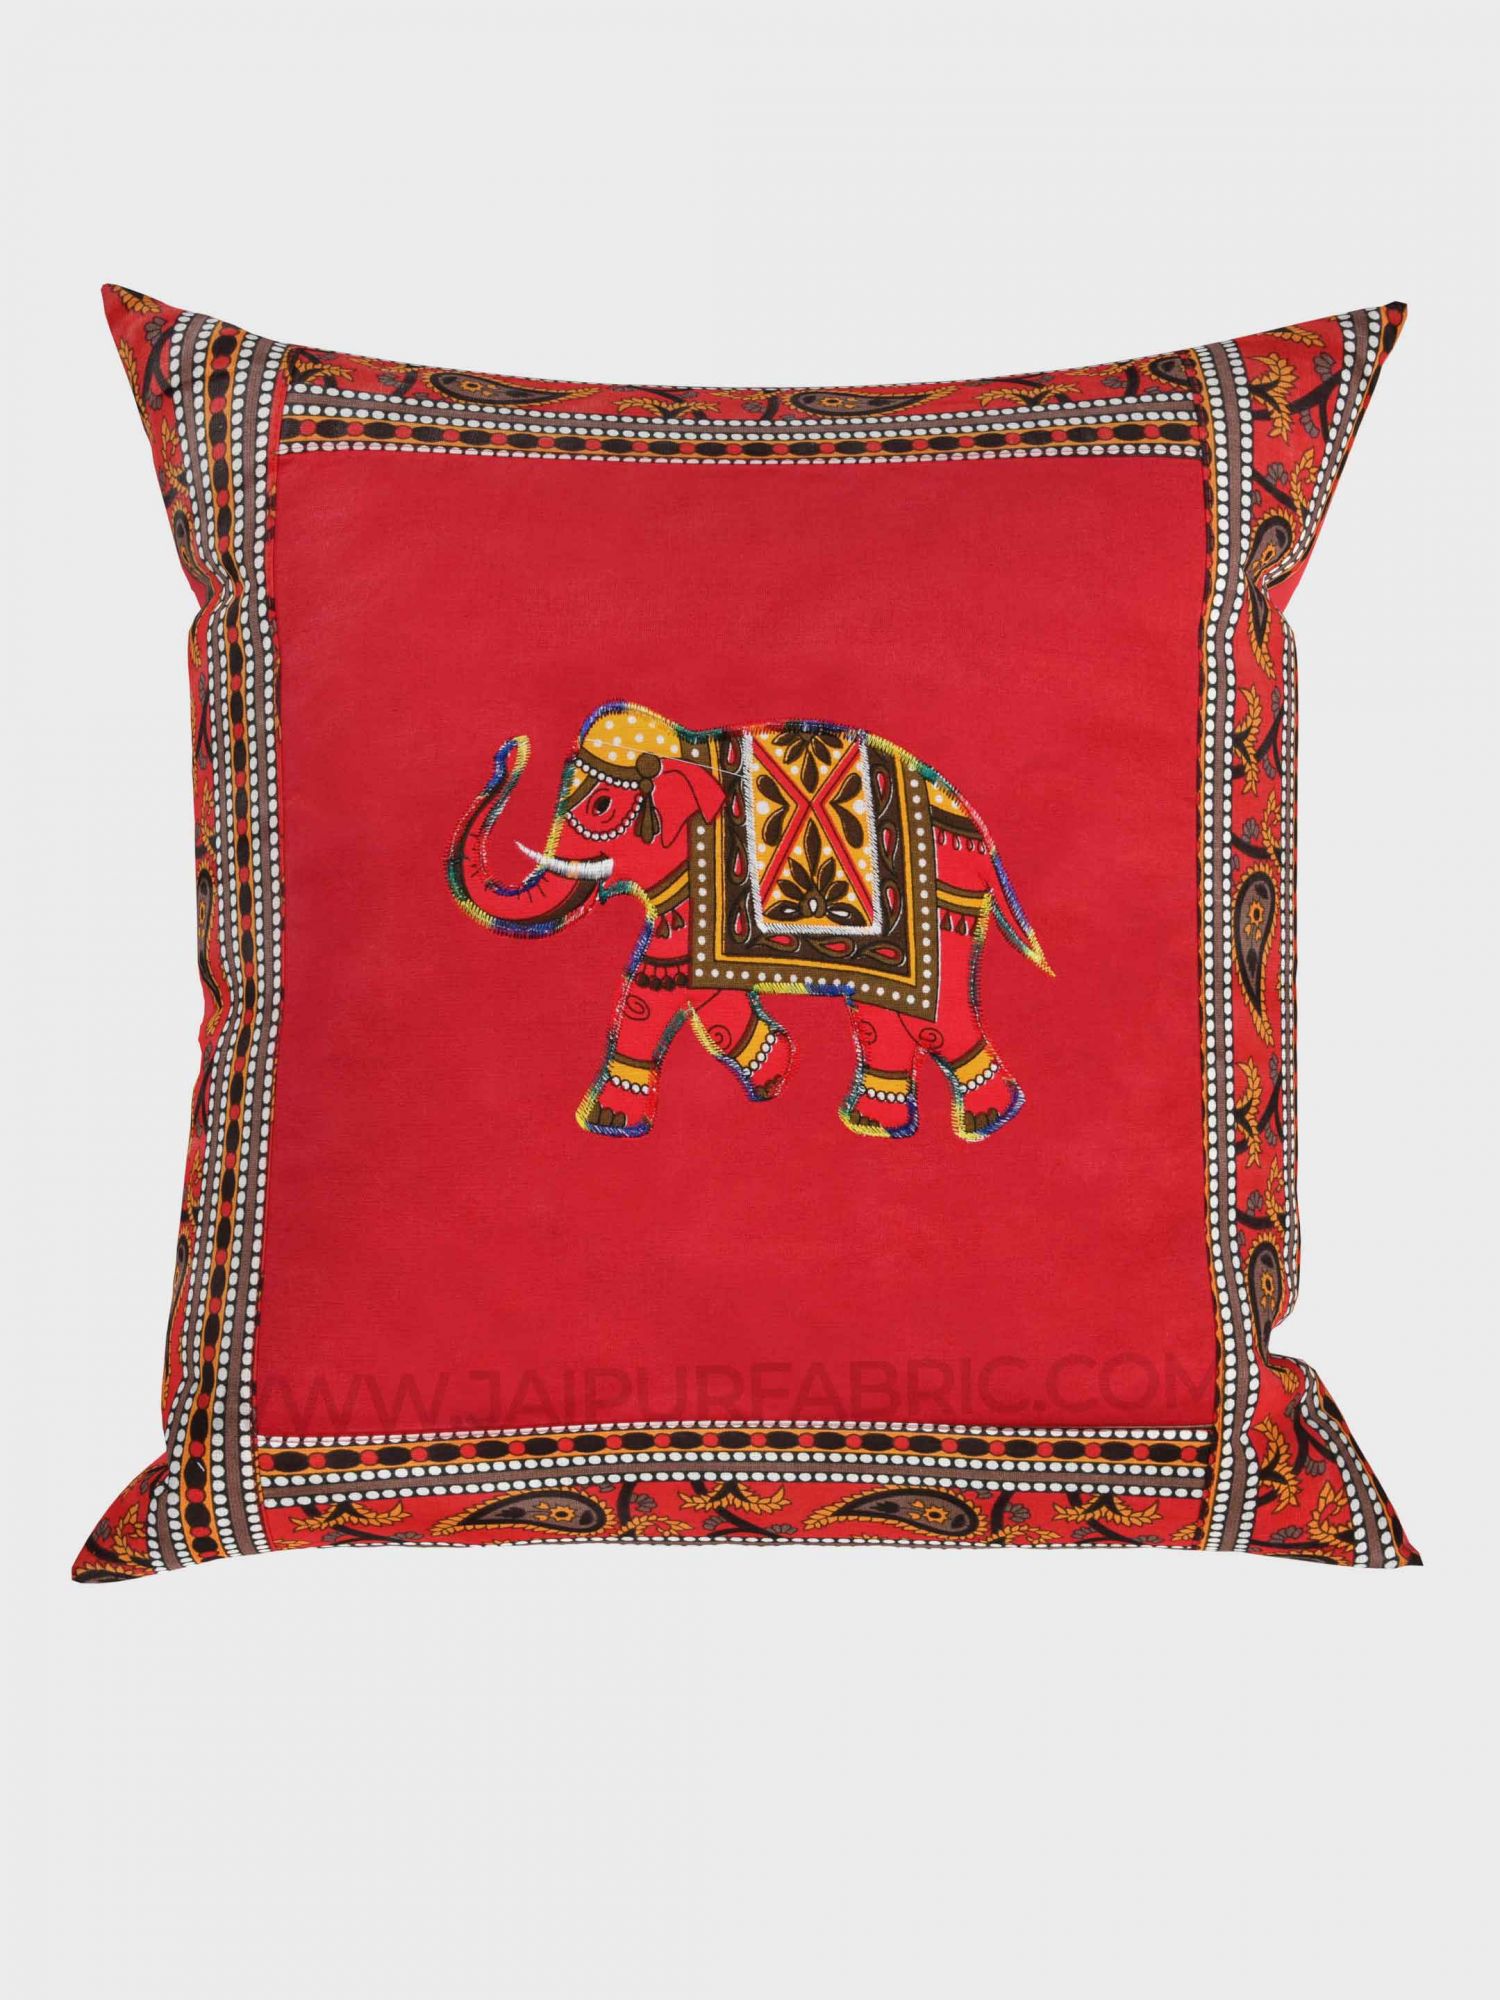 Applique Red Elephant Jaipuri Hand Made Embroidery Patch Work Cushion Cover